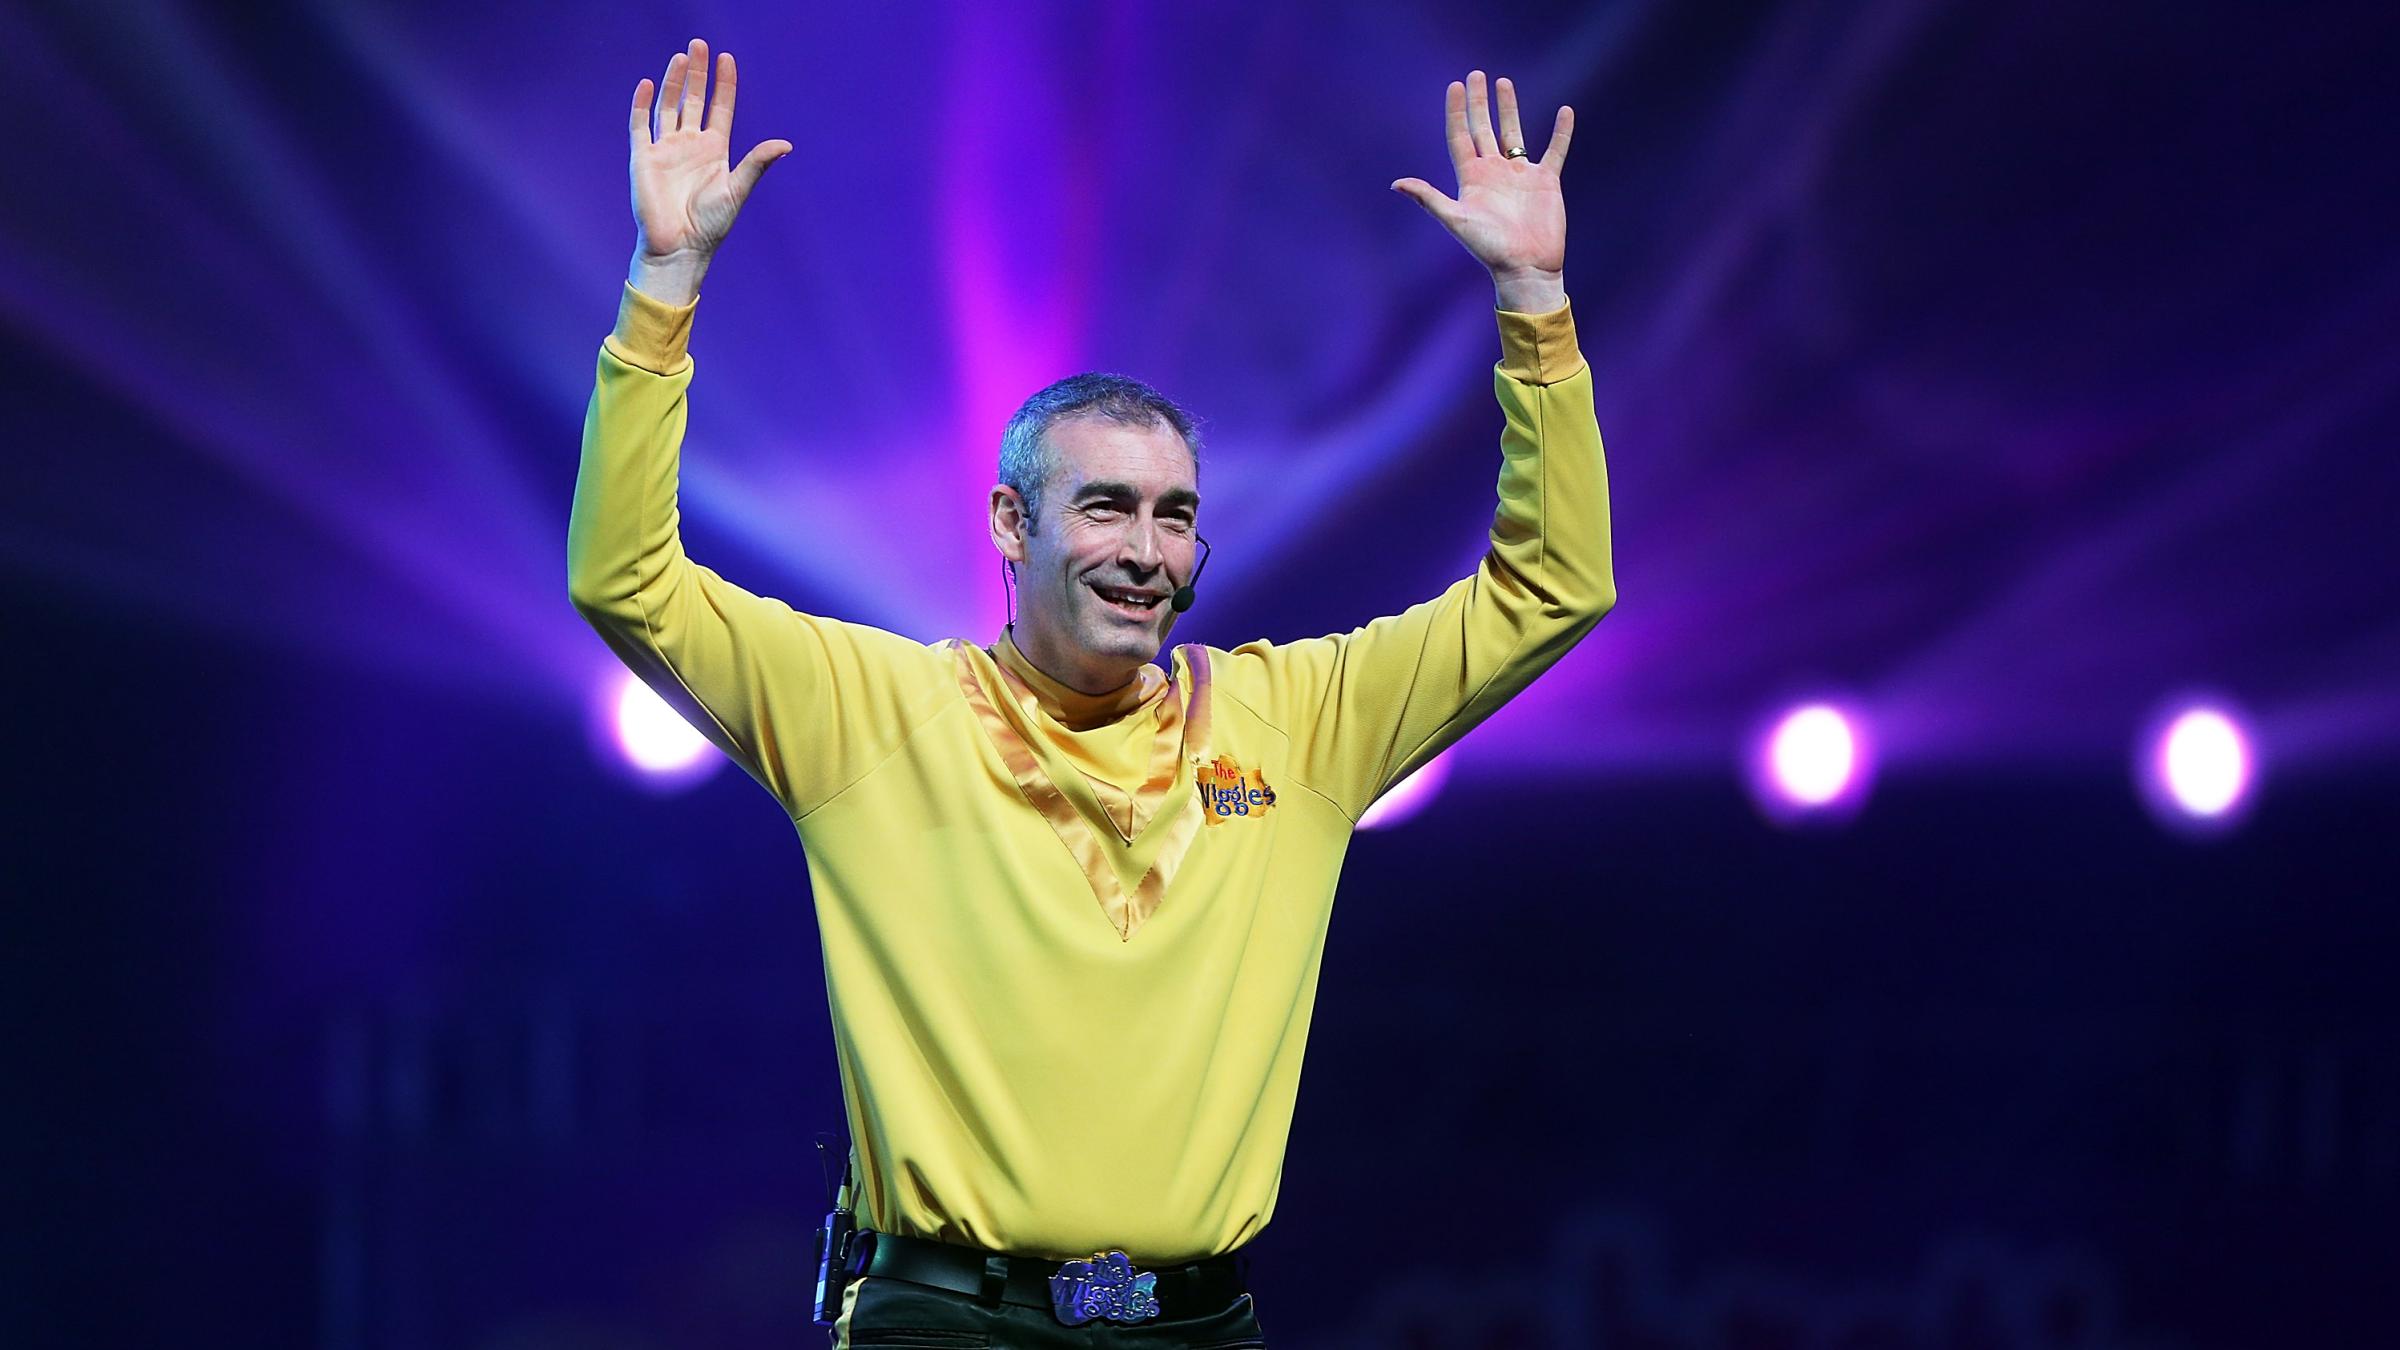 The Wiggles' Greg Page Opens Up About His Near-Death Experience